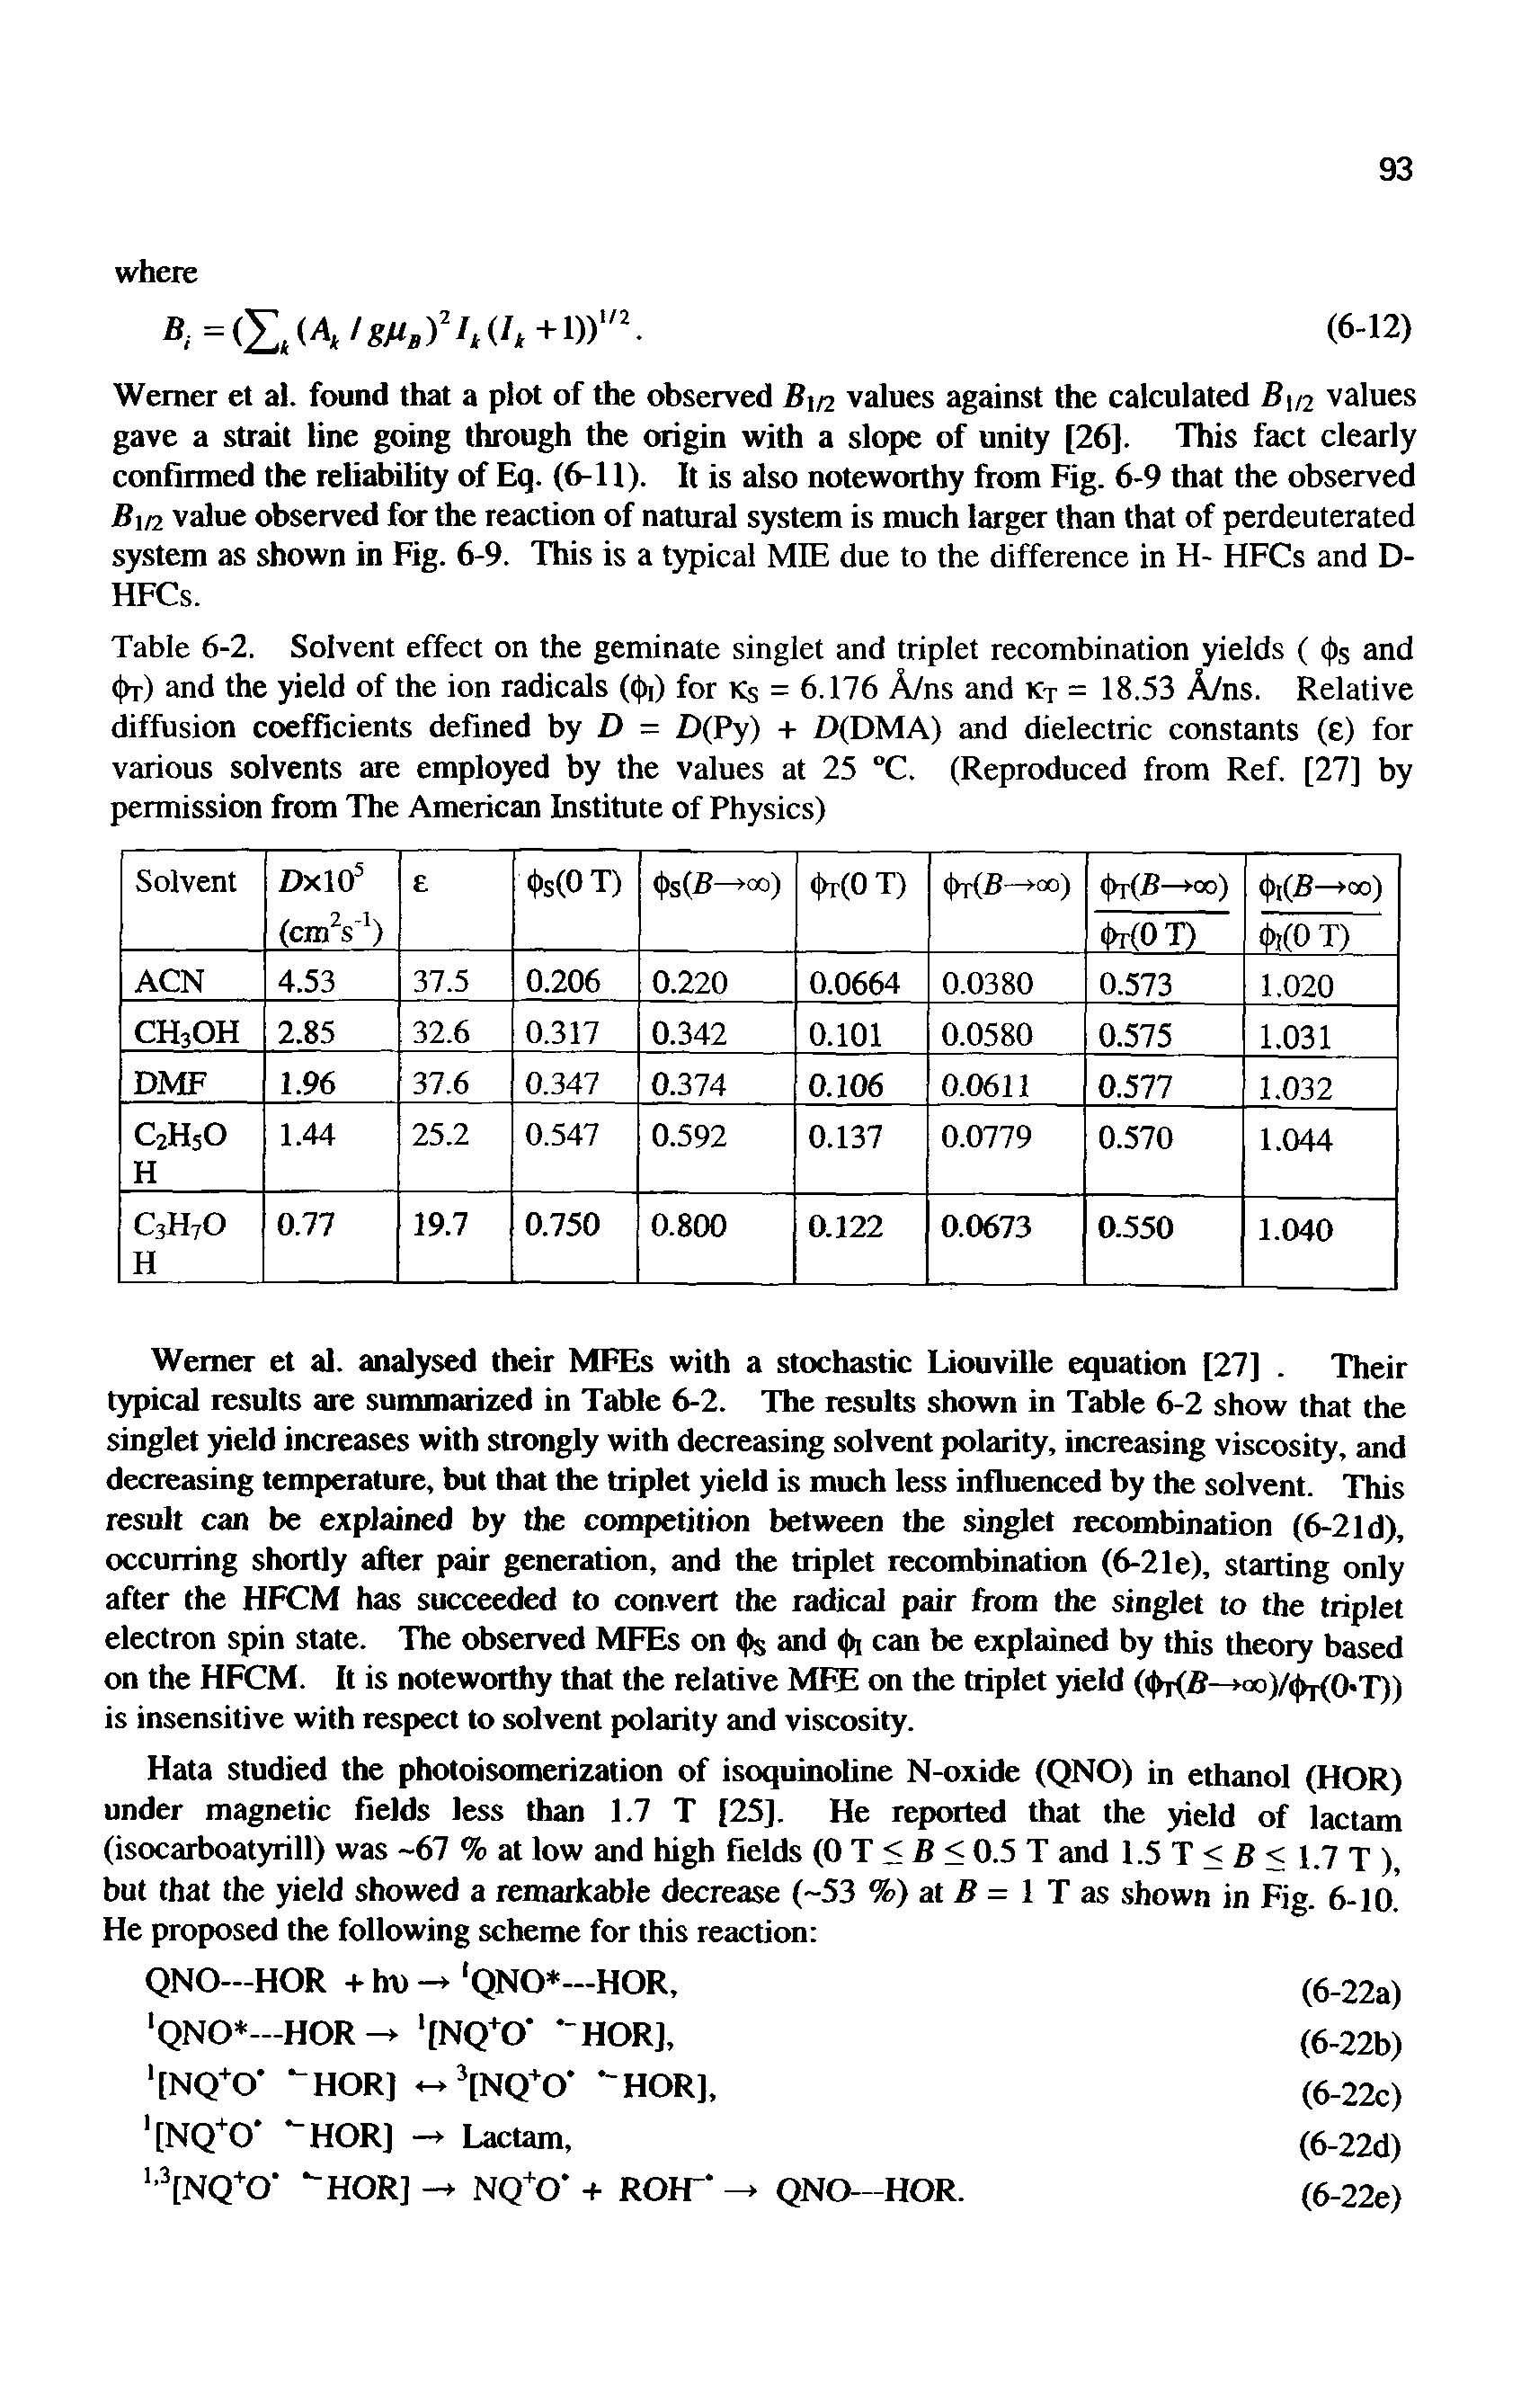 Table 6-2. Solvent effect on the geminate singlet and triplet recombination yields ( (t)s and (t>r) and the yield of the ion radicals ((()i) for Ks = 6.176 A/ns and Kt = 18.53 A/ns. Relative diffusion coefficients defined by D = D(Py) + D(DMA) and dielectric constants (e) for various solvents are employed by the values at 25 °C. (Reproduced from Ref. [27] by permission from The American Institute of Physics)...